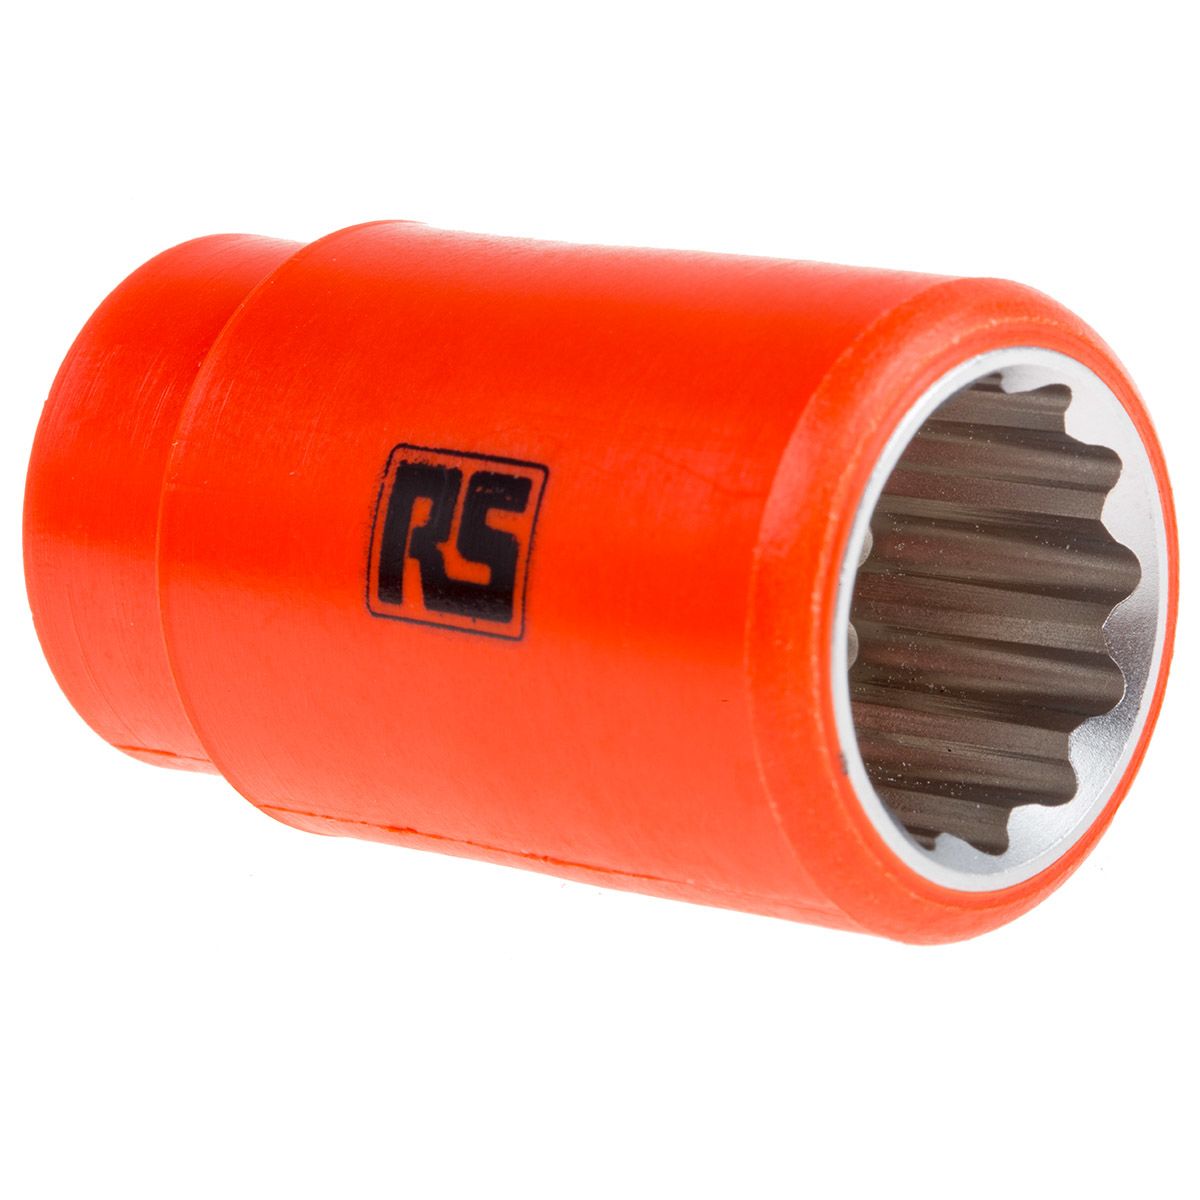 ITL Insulated Tools Ltd 19mm Bi-Hex Socket With 1/2 in Drive , Length 50 mm